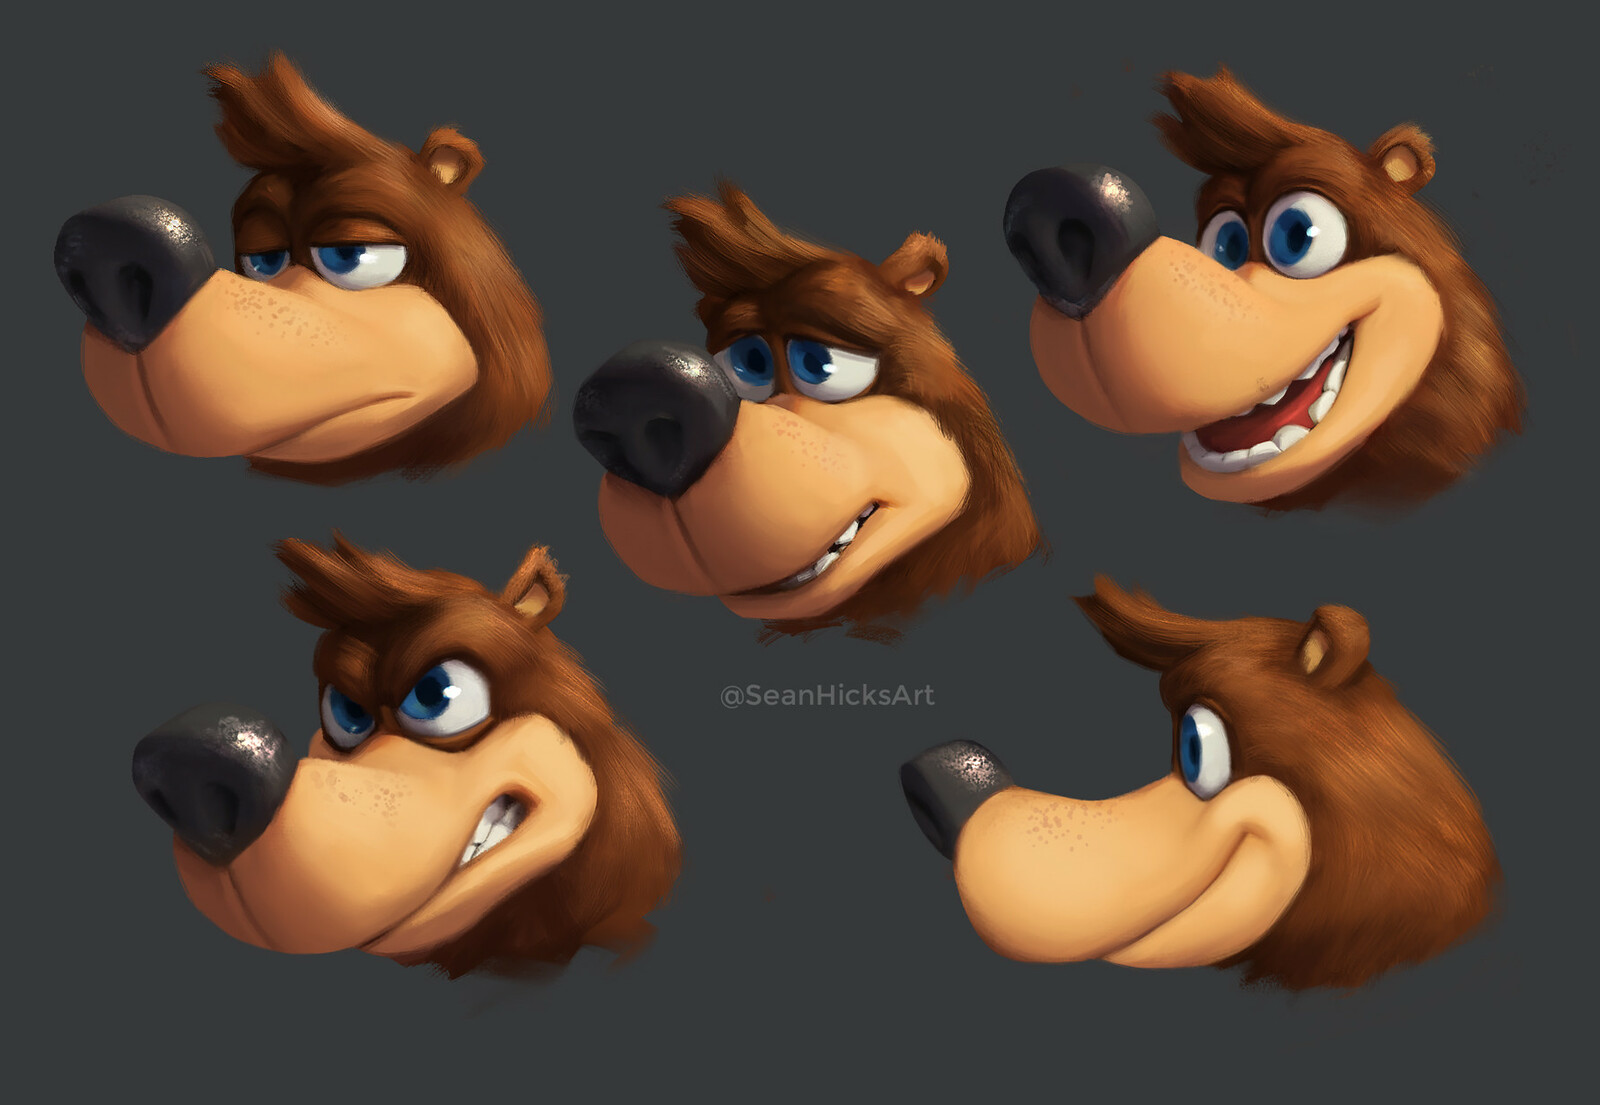 An older exploration of different expressions for Banjo. Also helped with seeing how Banjo's brows would work with fur that leaned toward realism. 